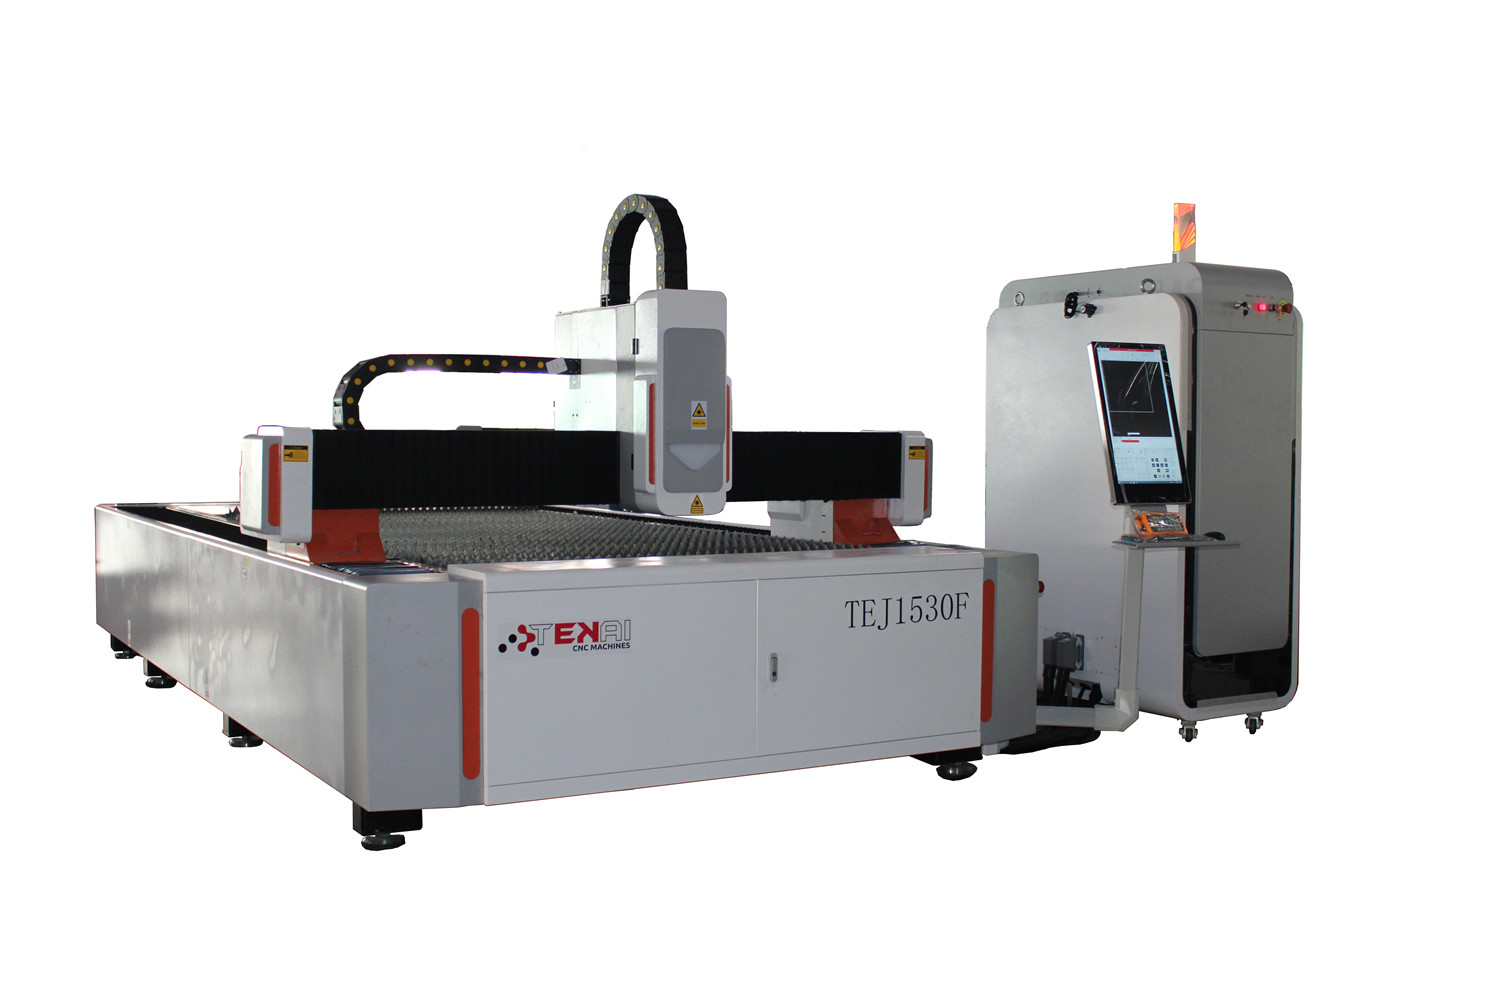 How to maintain the fiber laser cutting machine daily?